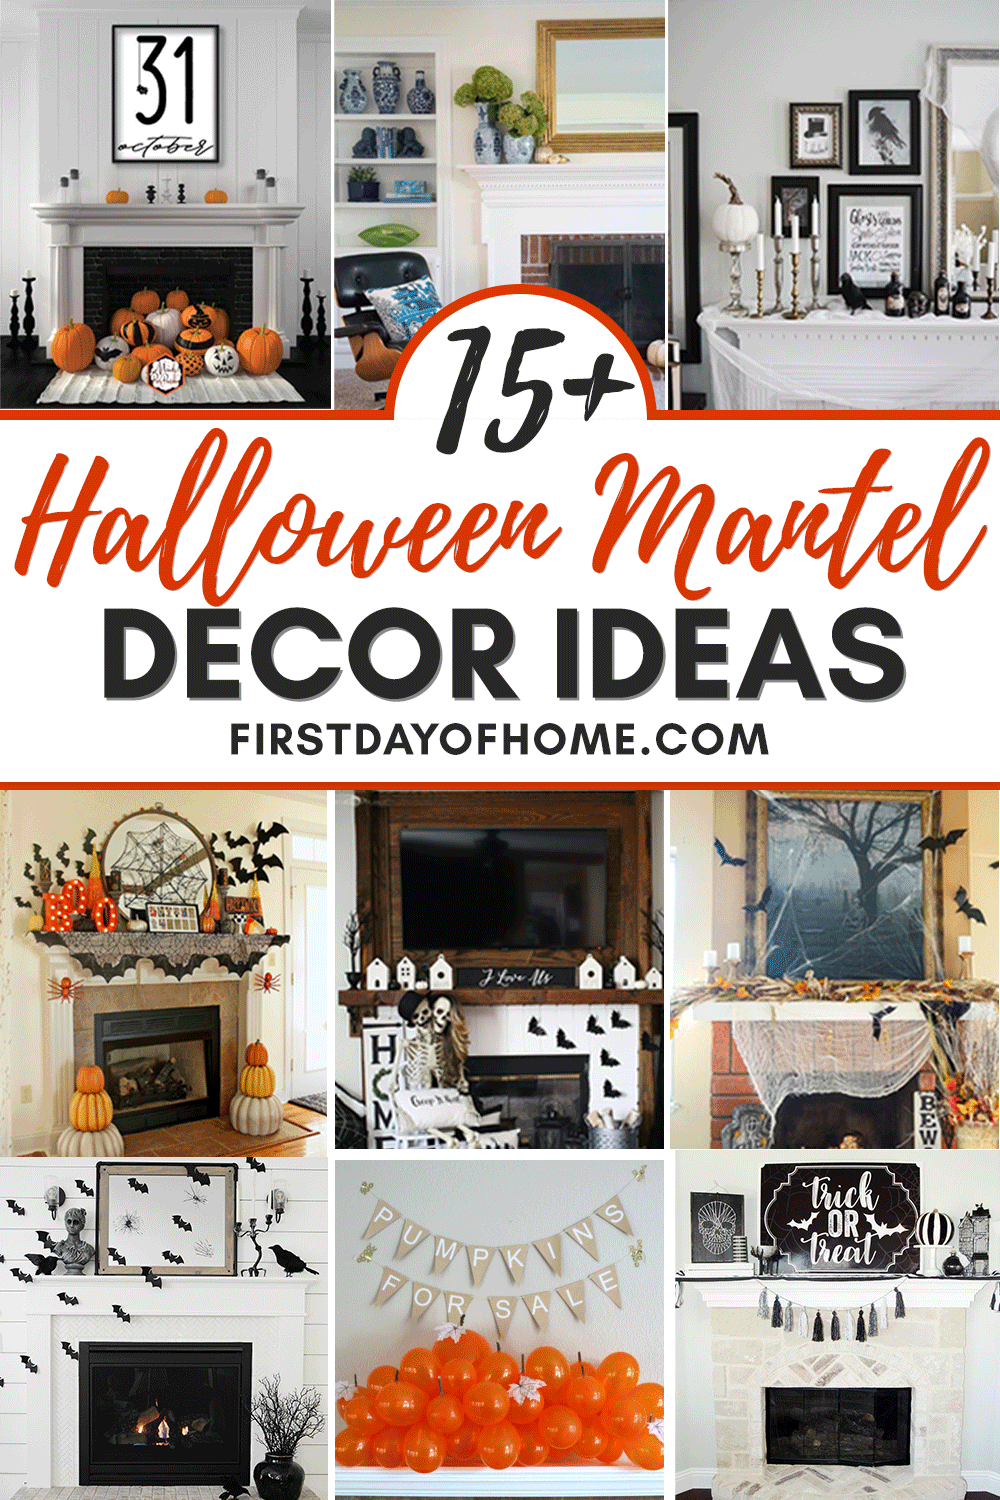 Halloween mantel decorations in various styles, including bats, farmhouse signs, bats and spider webs